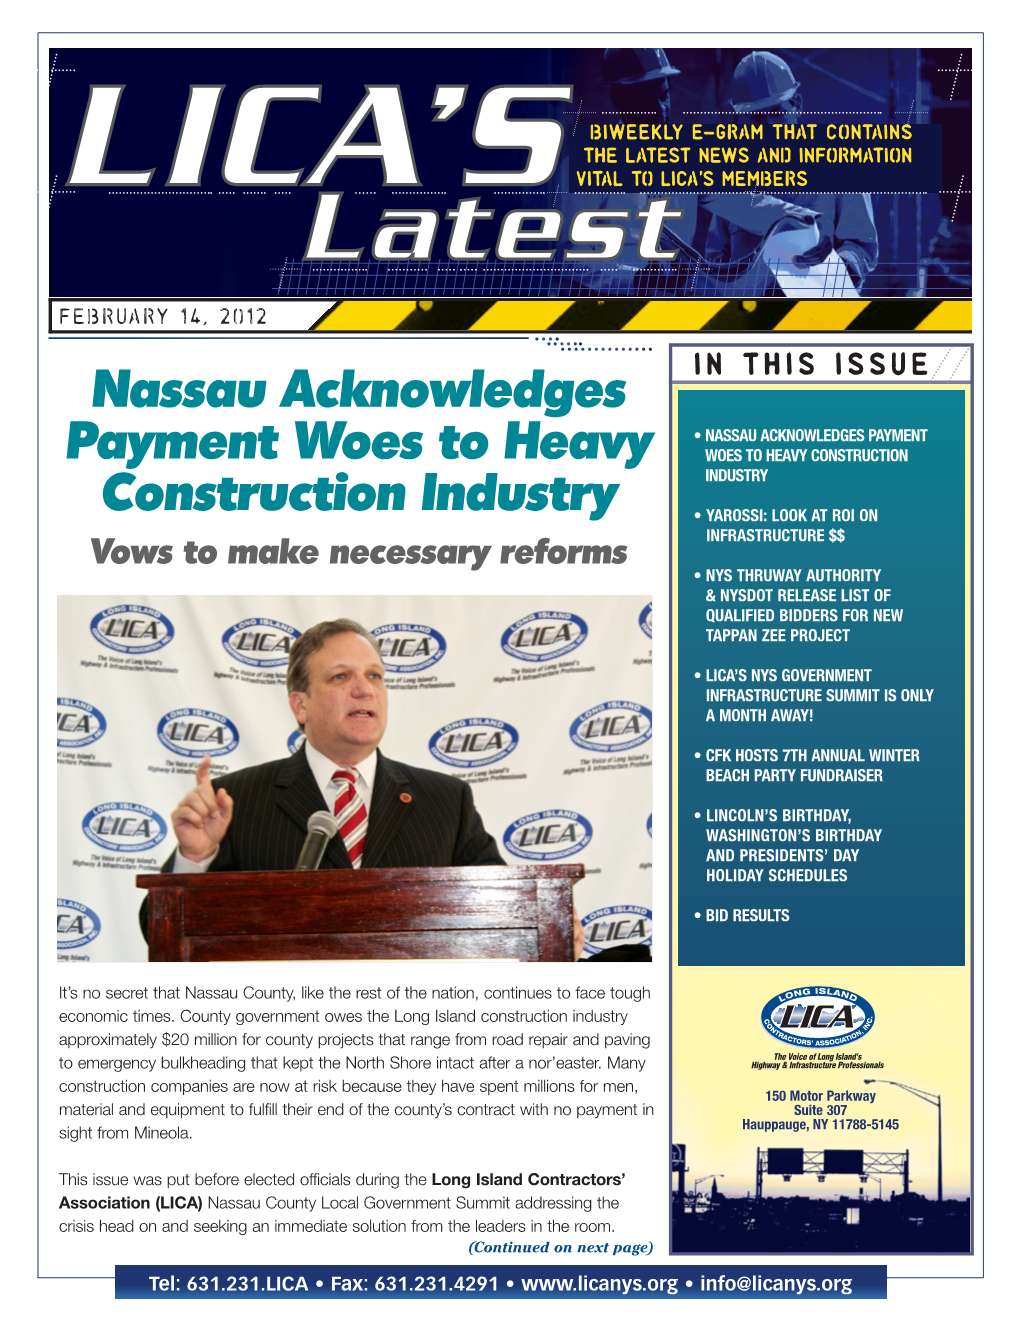 Nassau Acknowledges Payment Woes to Heavy Construction Industry